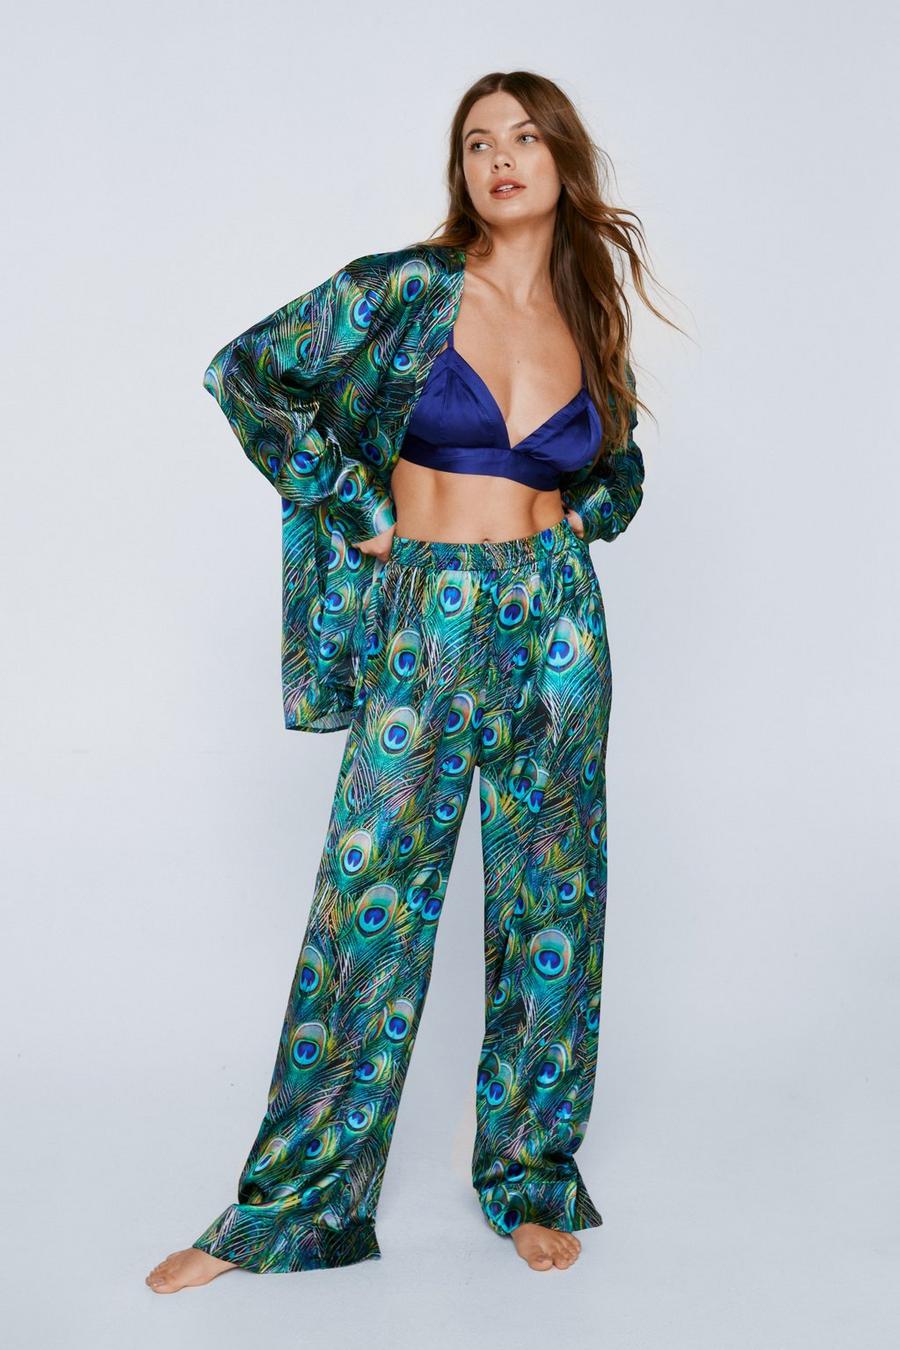 Satin Peacock Print 3pc Shirt Trousers and Bralette Set